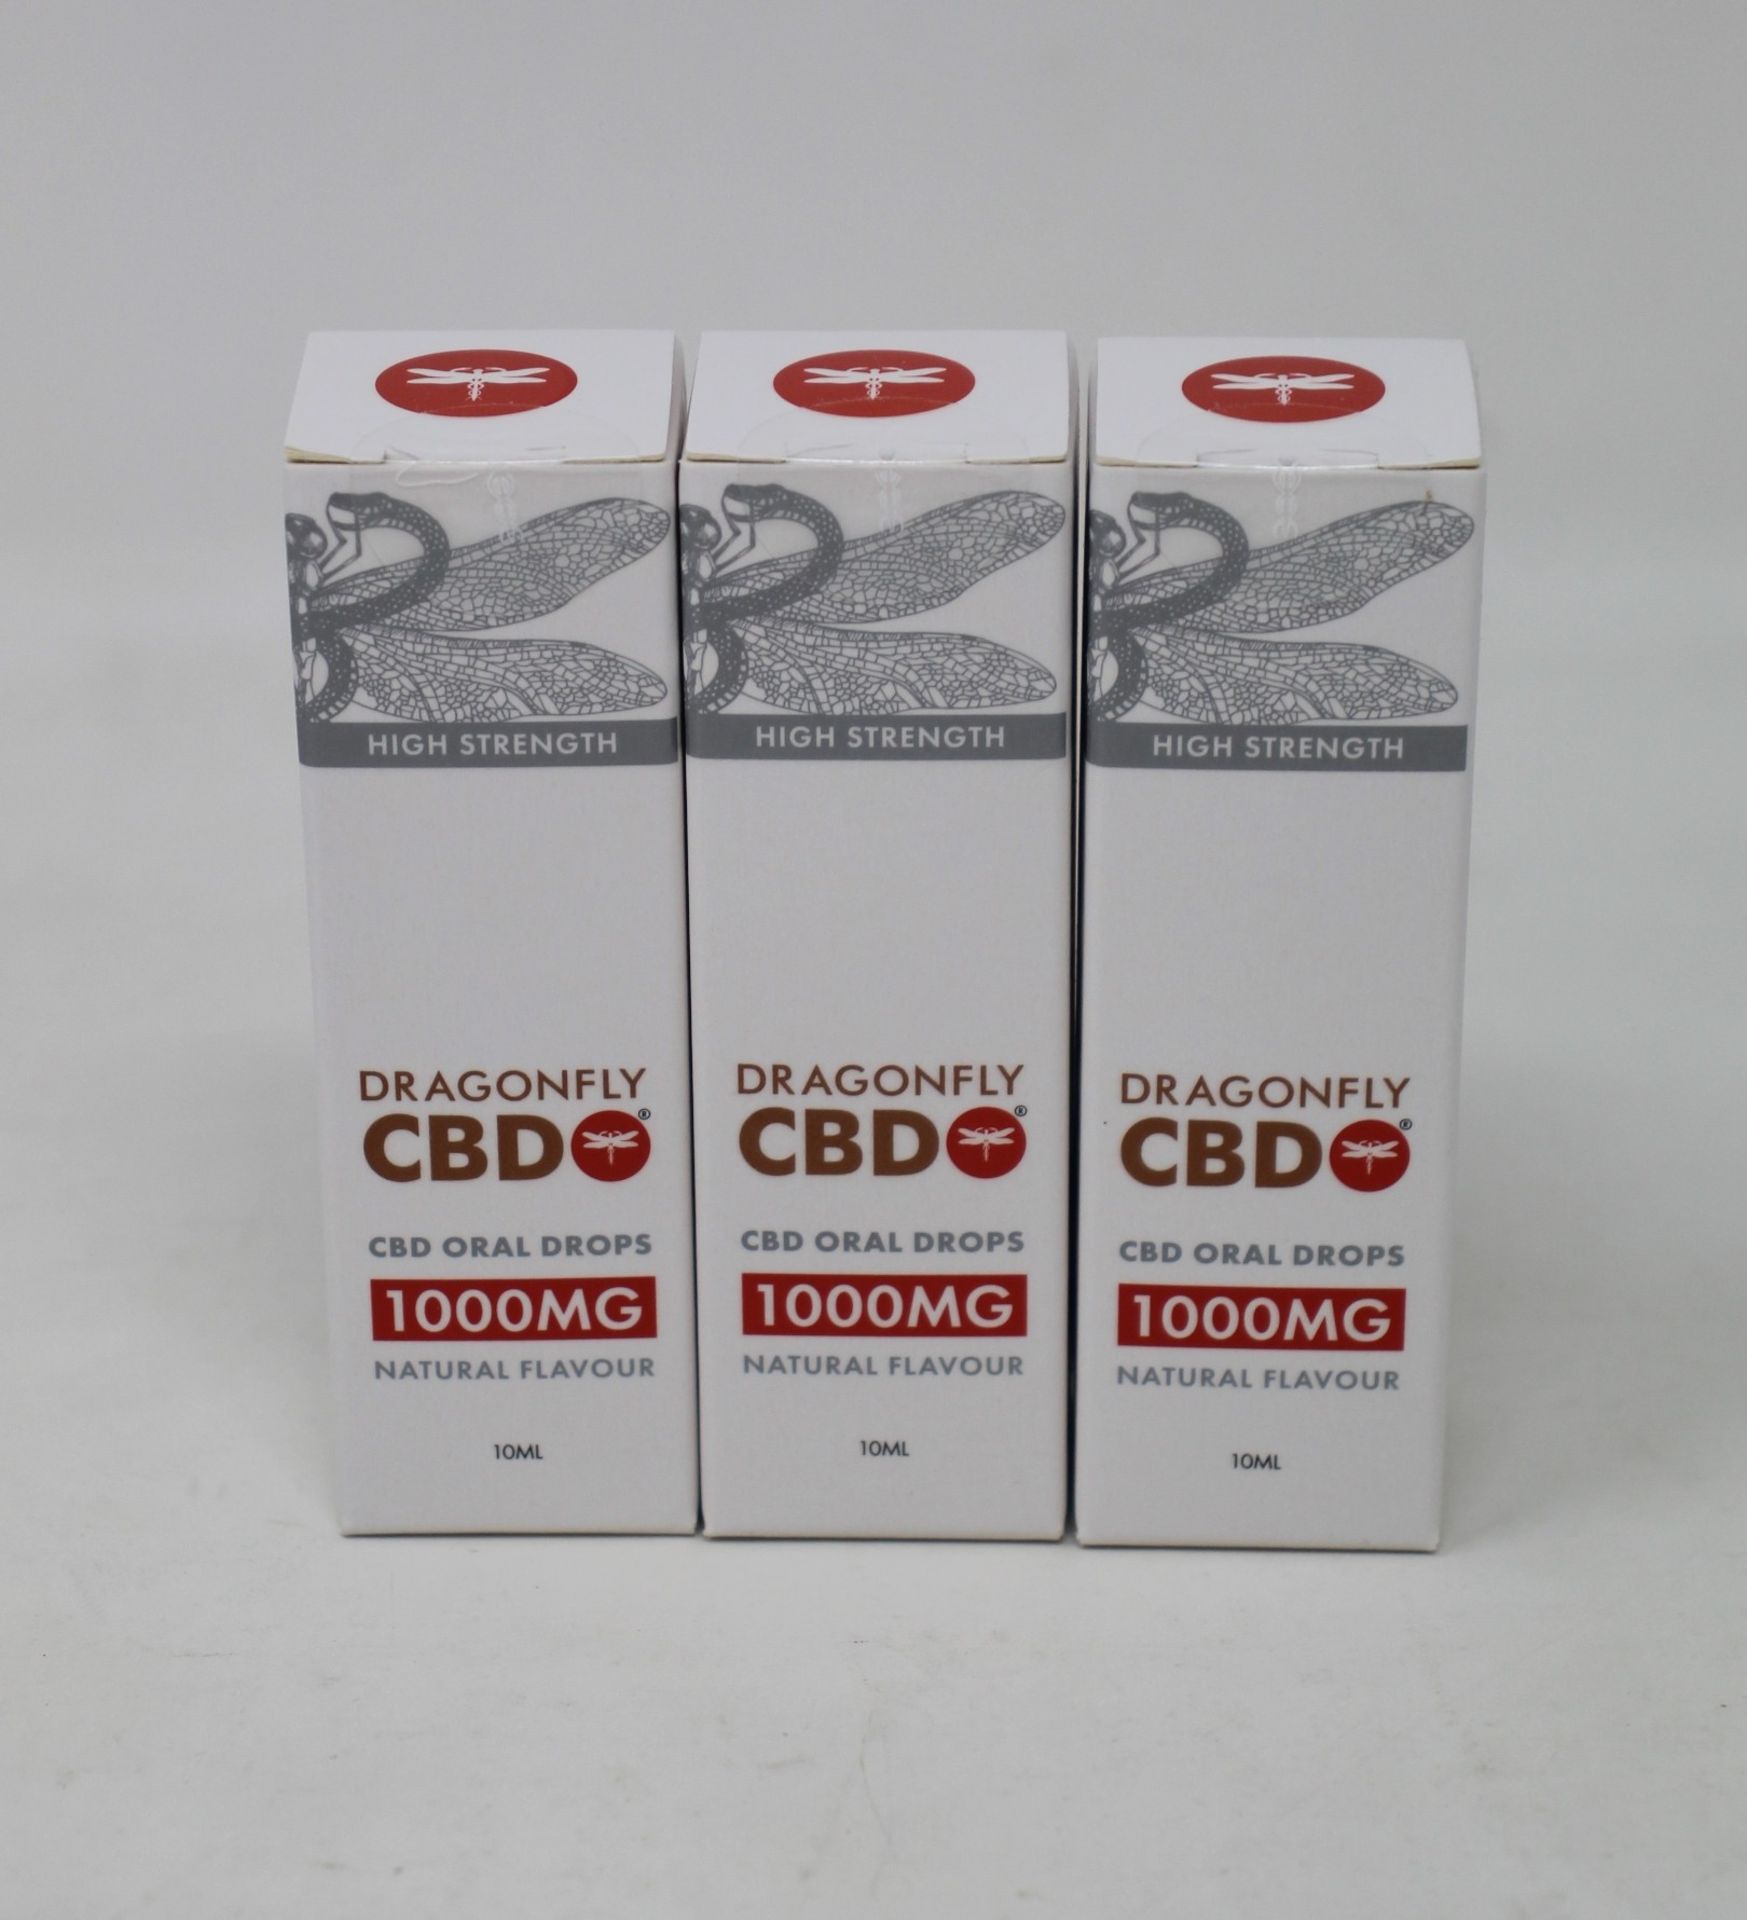 Twelve Dragonfly CBD Oral Drops 1000mg/10ml Natural Flavour (Exp: 02/2023).